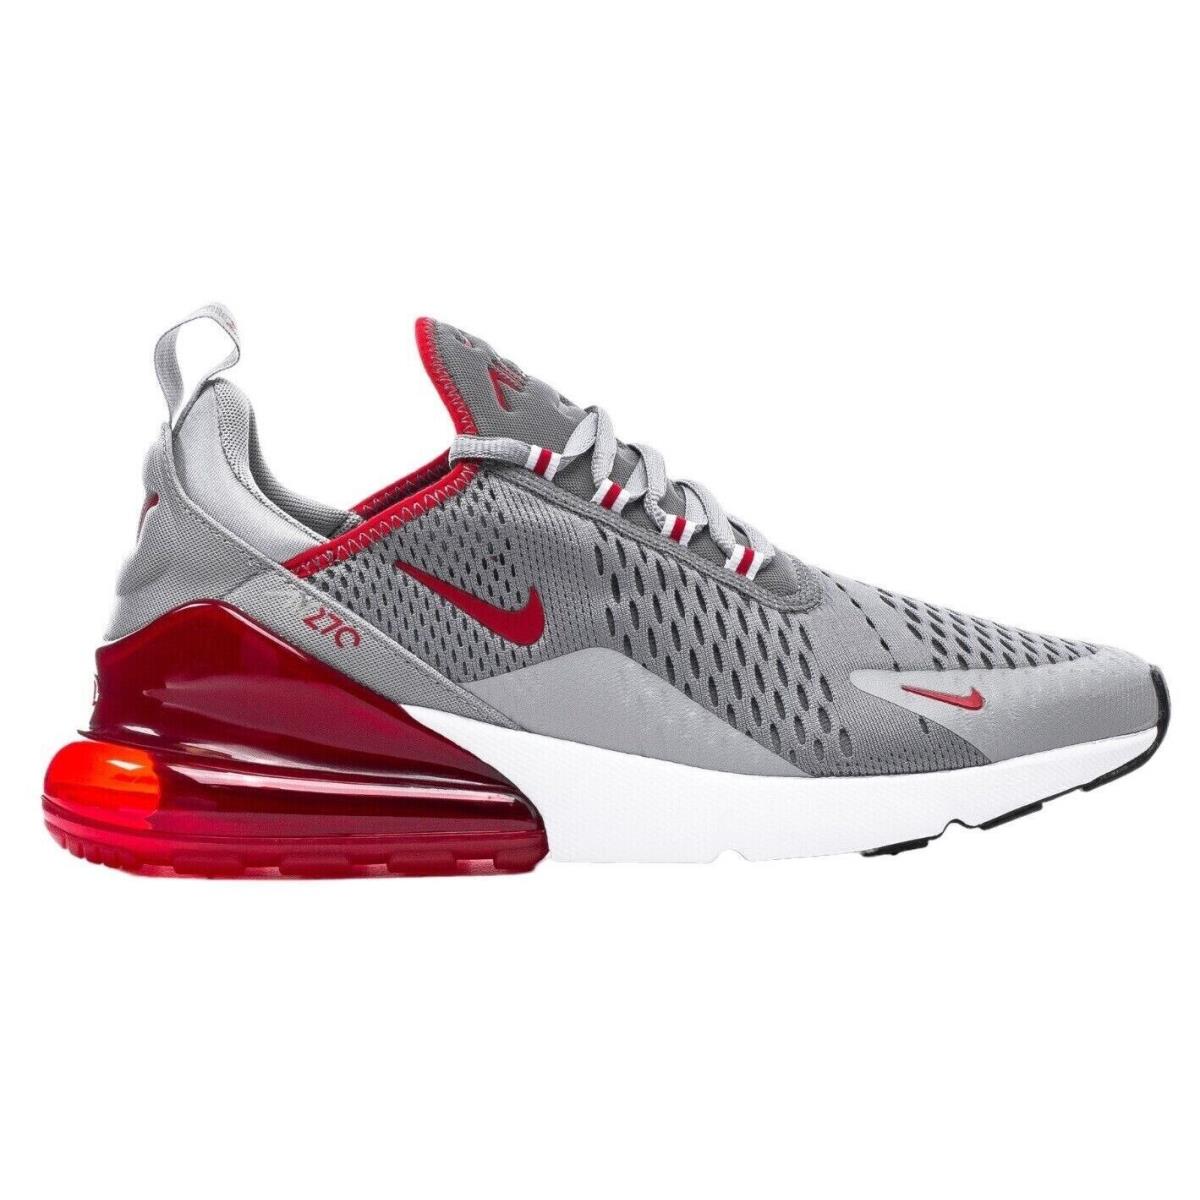 Nike Air Max 270 Men`s Casual Shoes All Colors US Sizes 7-14 Particle Grey/University Red